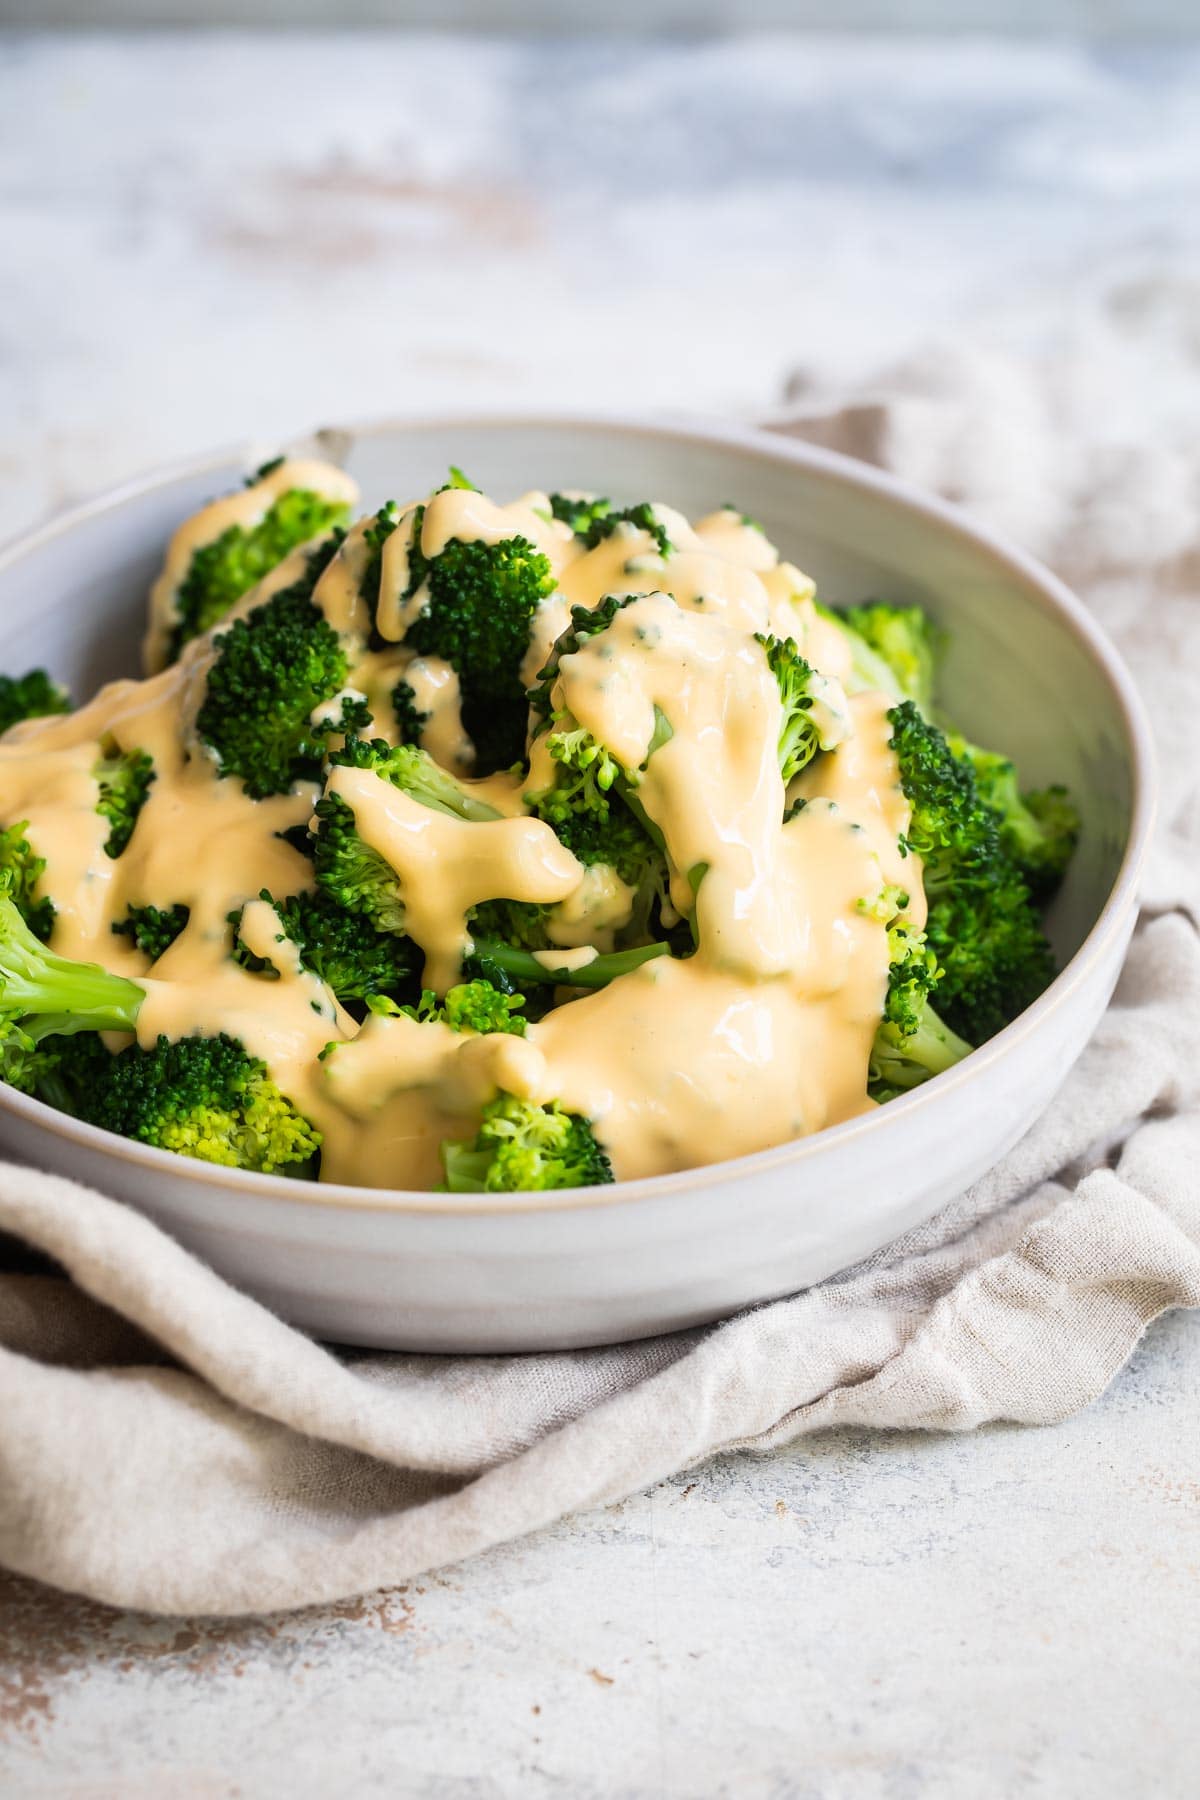 A bowl of blanched broccoli with cheese sauce drizzled on top.